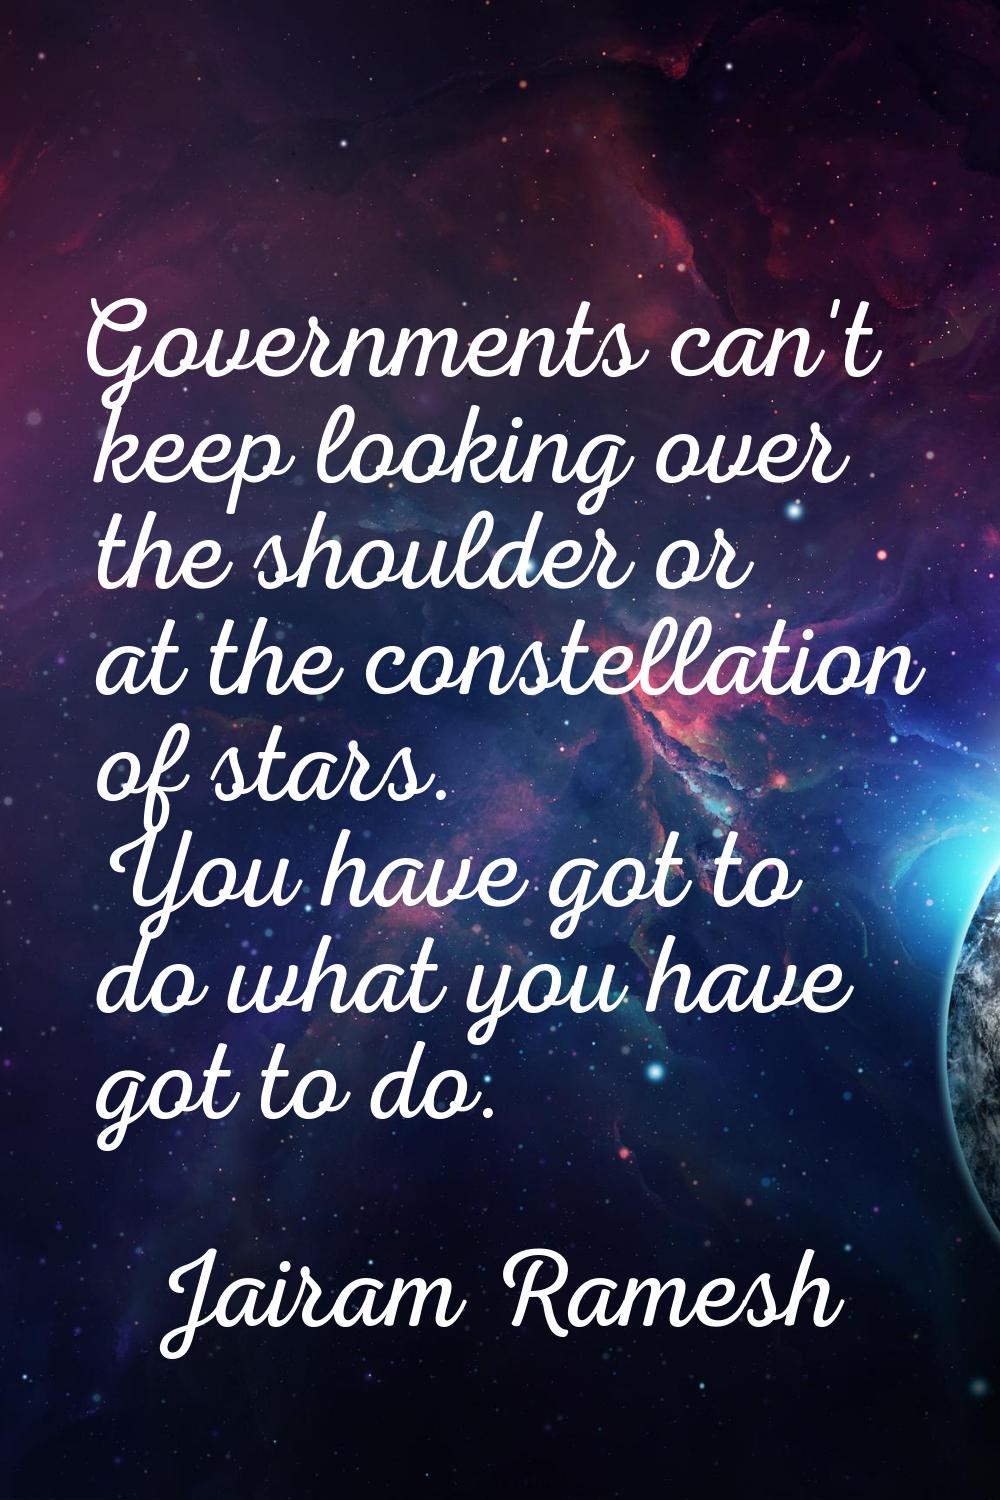 Governments can't keep looking over the shoulder or at the constellation of stars. You have got to 